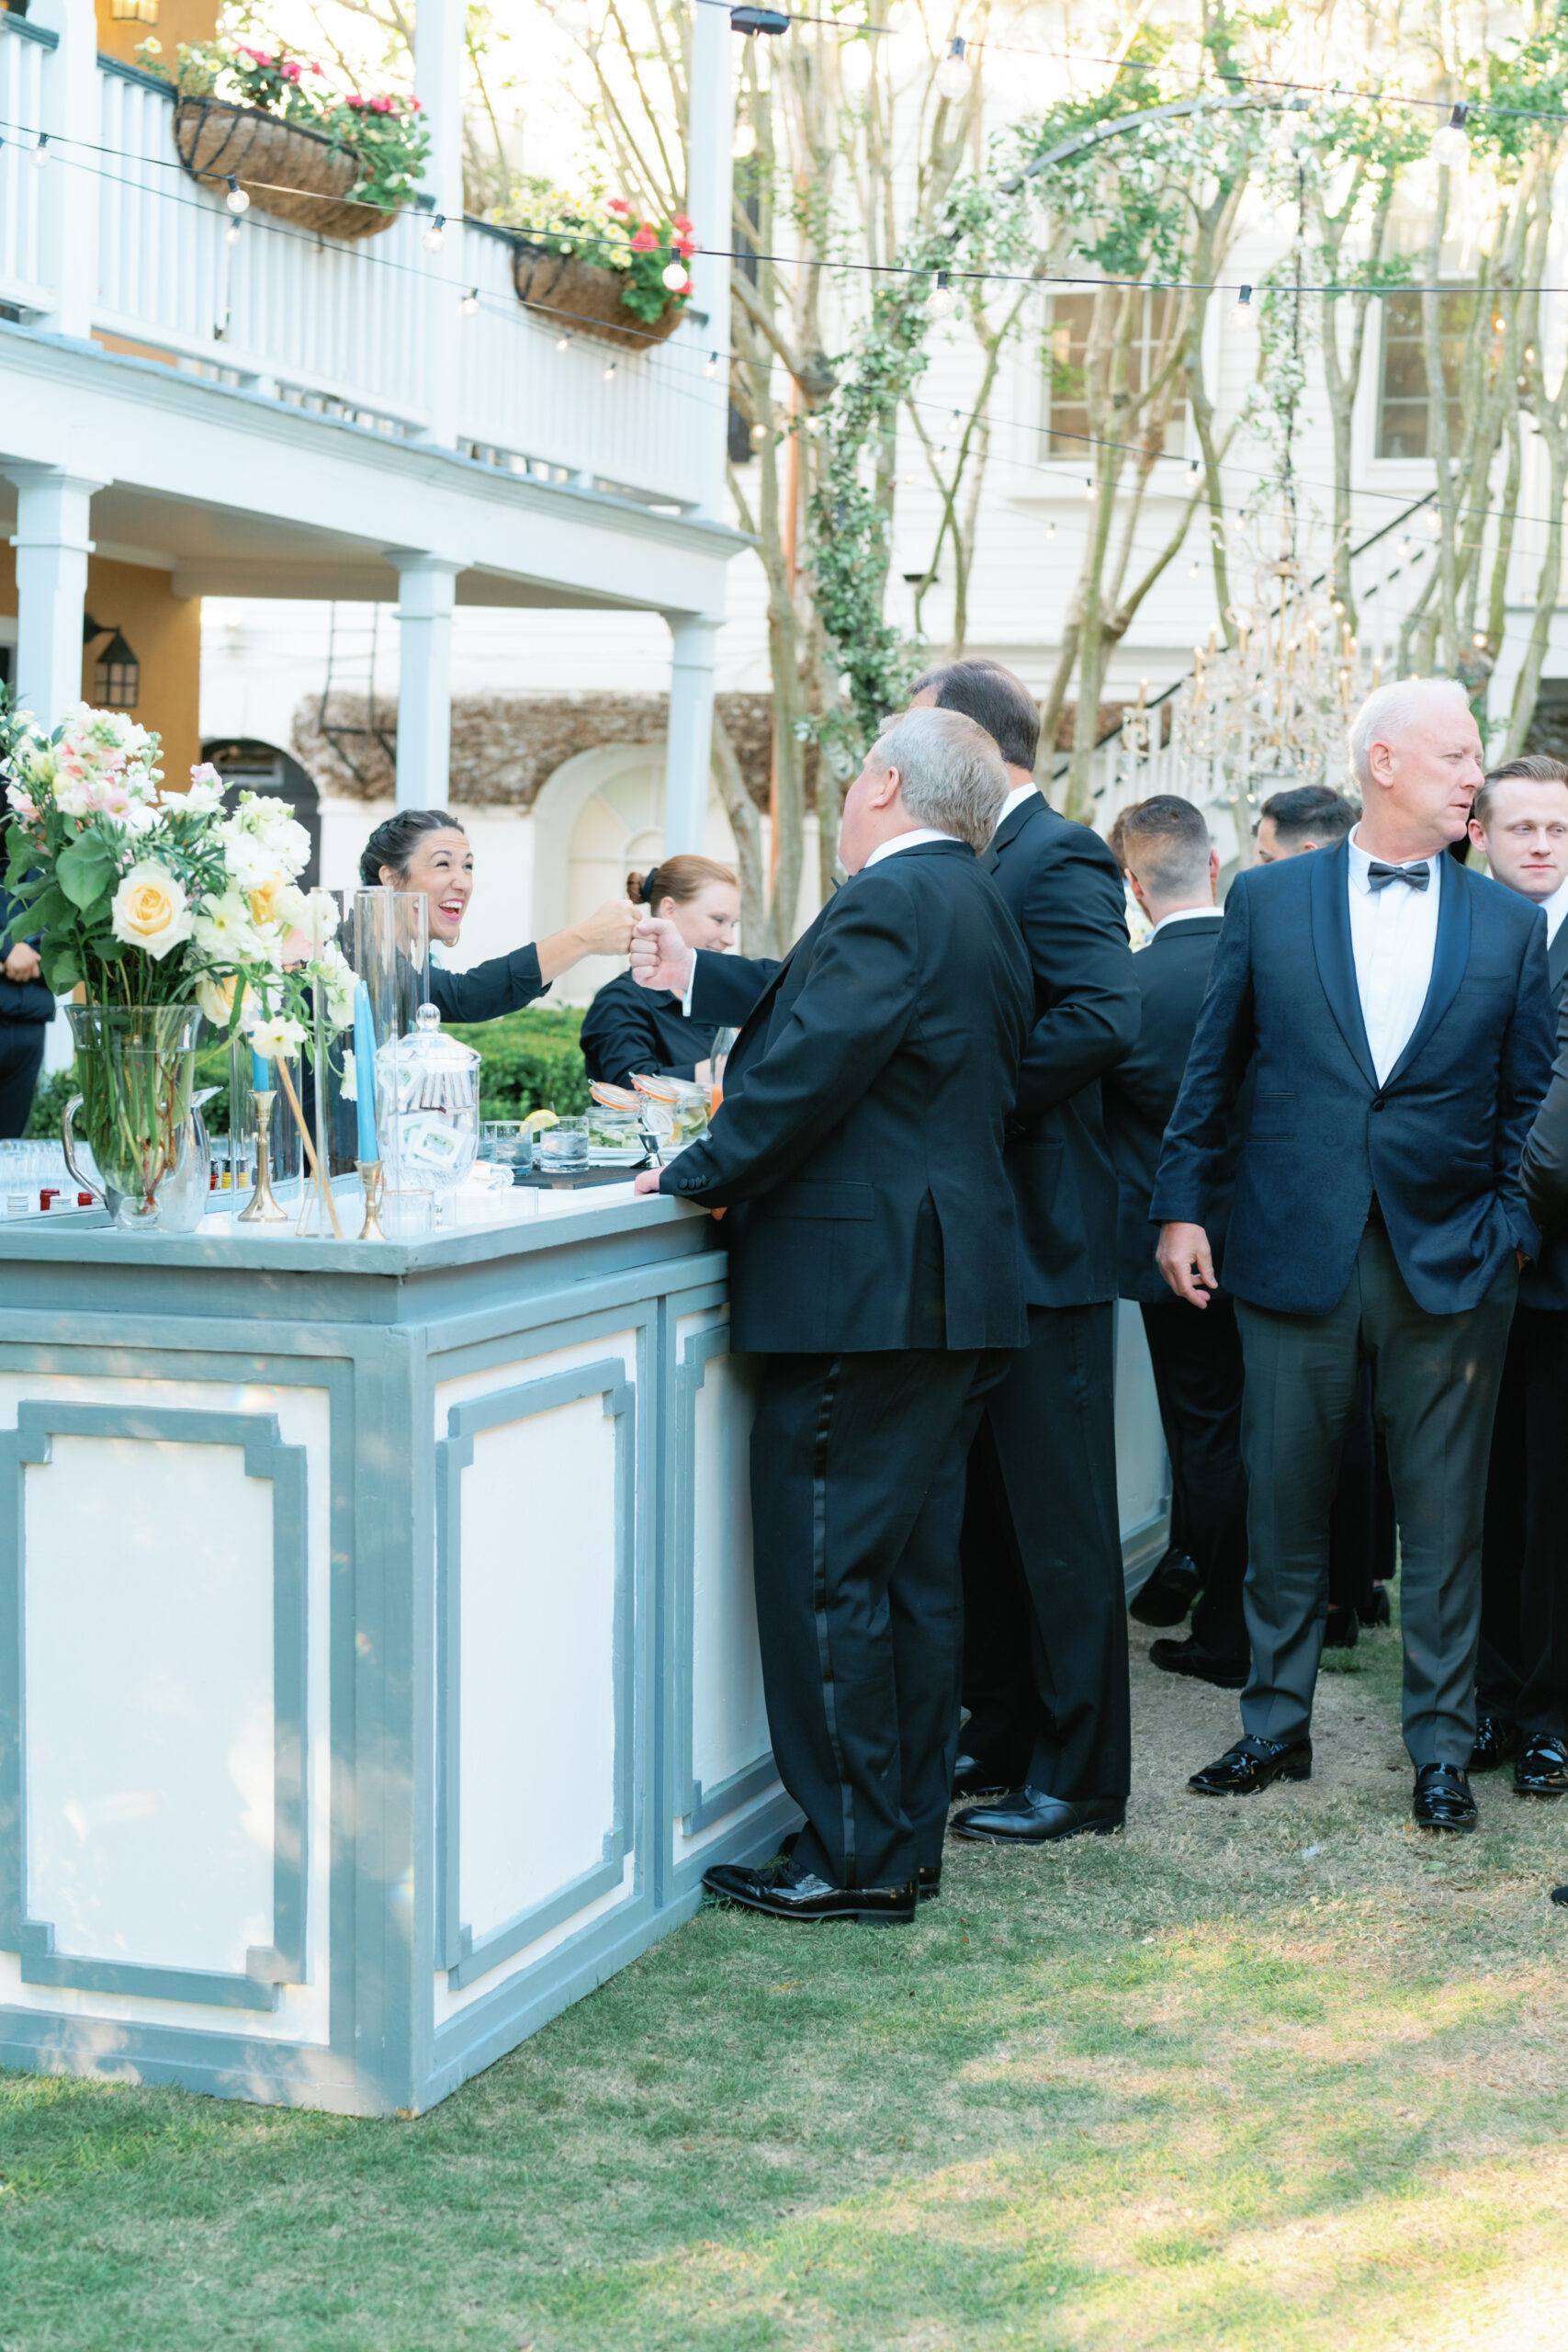 Wedding guests interact with bartenders.